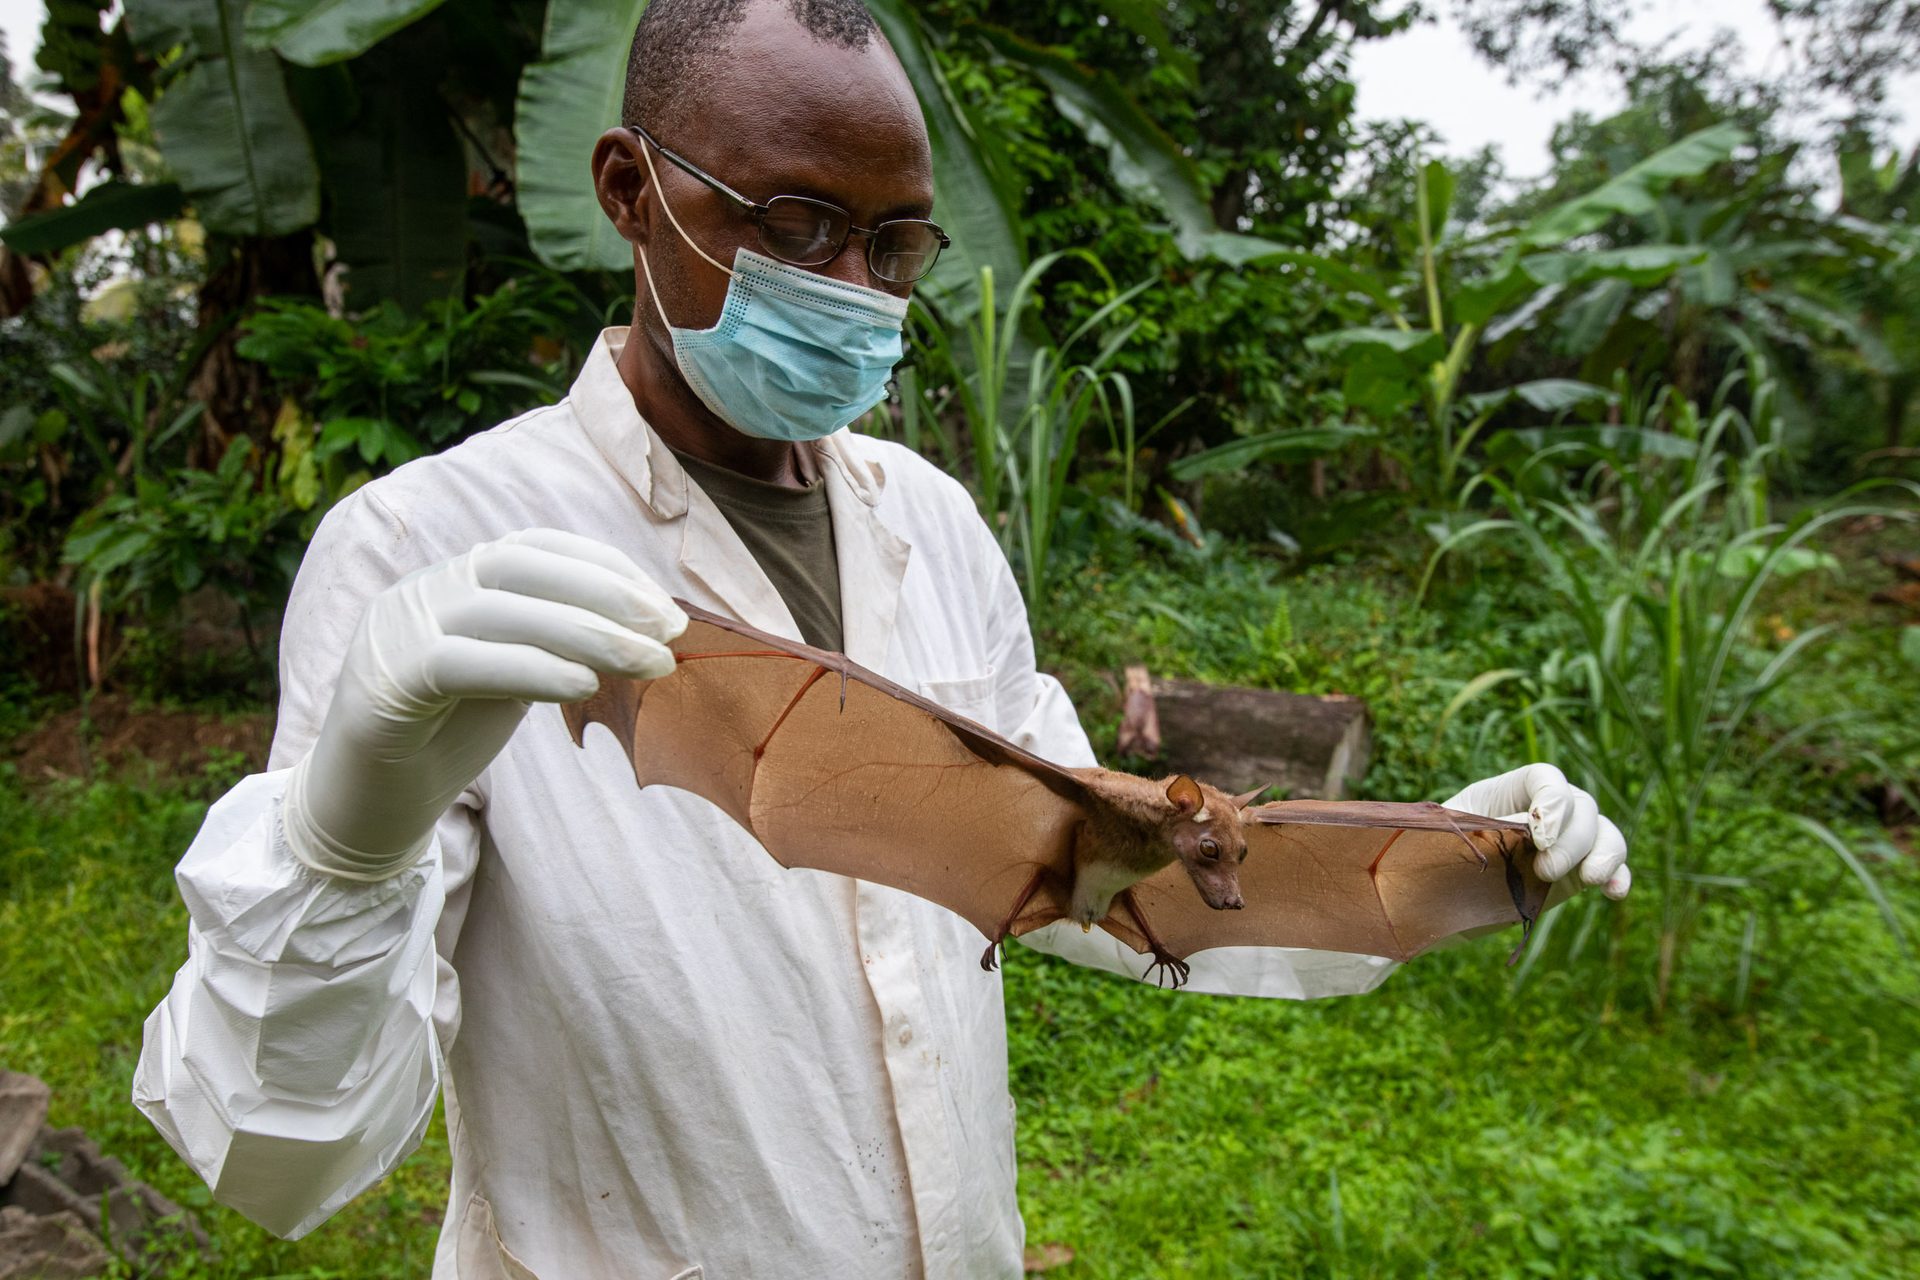 A scientist measures a bat during a wildlife sampling mission in Cameroon.